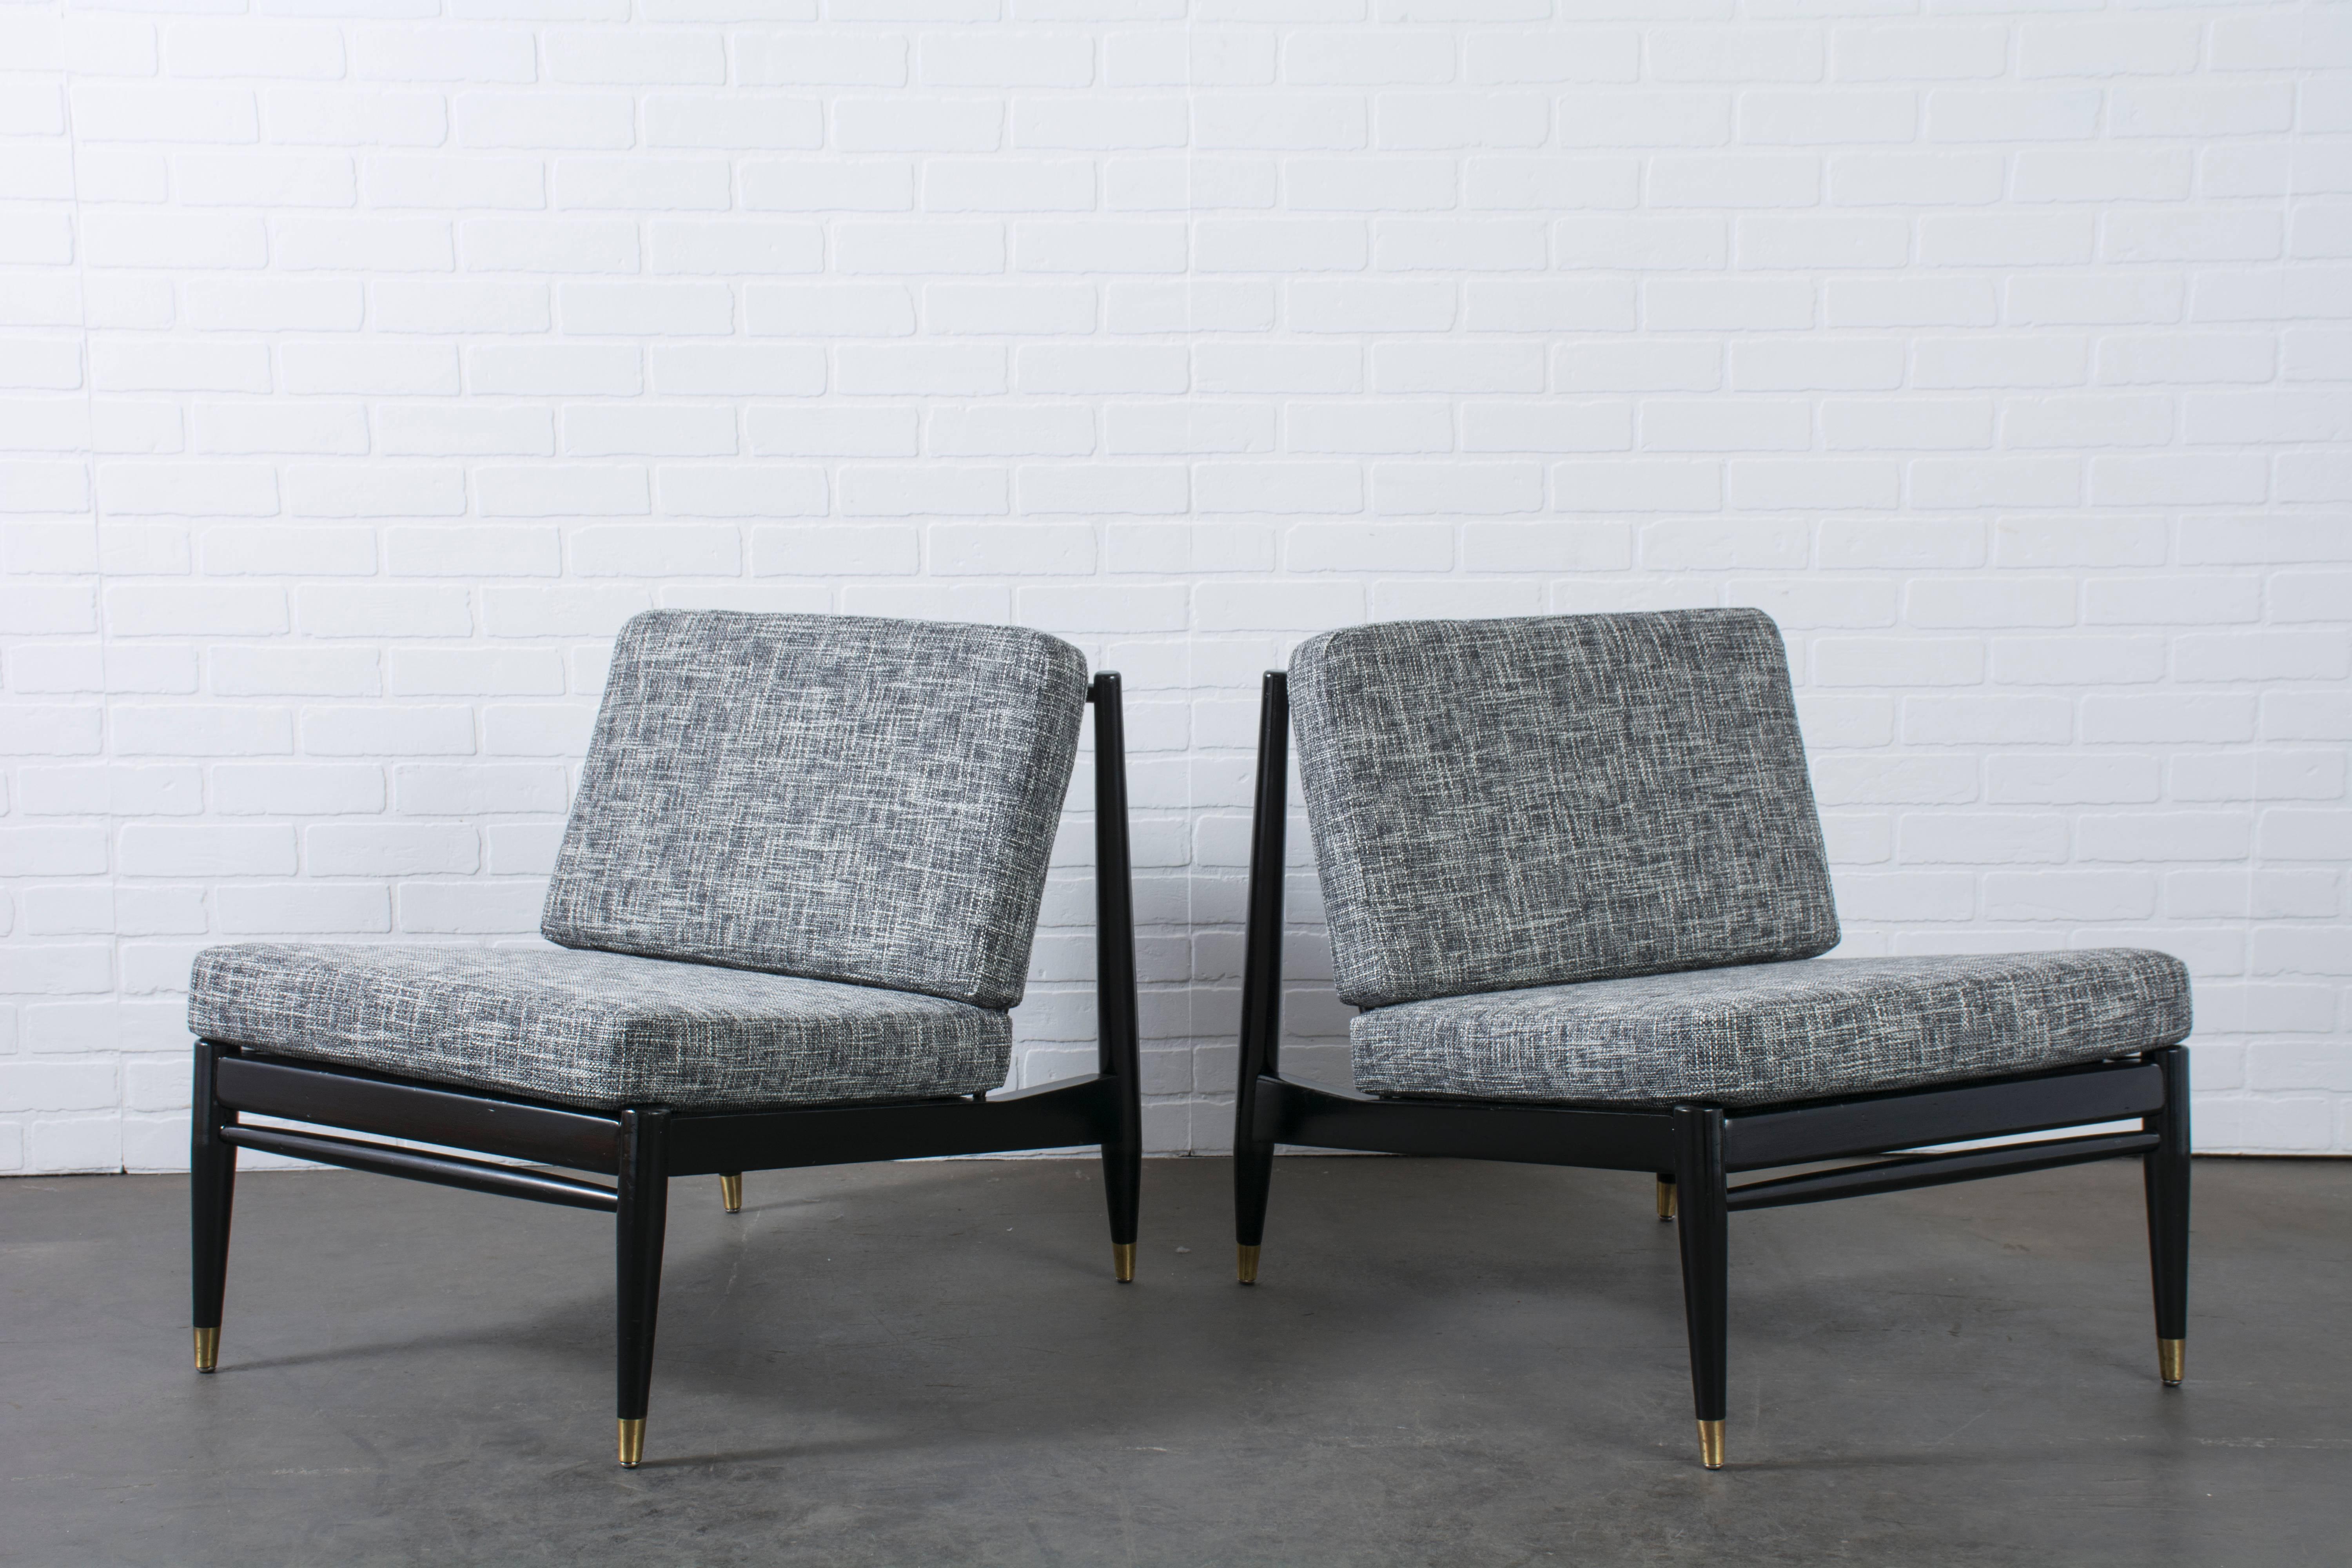 This is a pair of vintage Mid-Century lounge chairs with black frames, gold accents and new black and white upholstery.